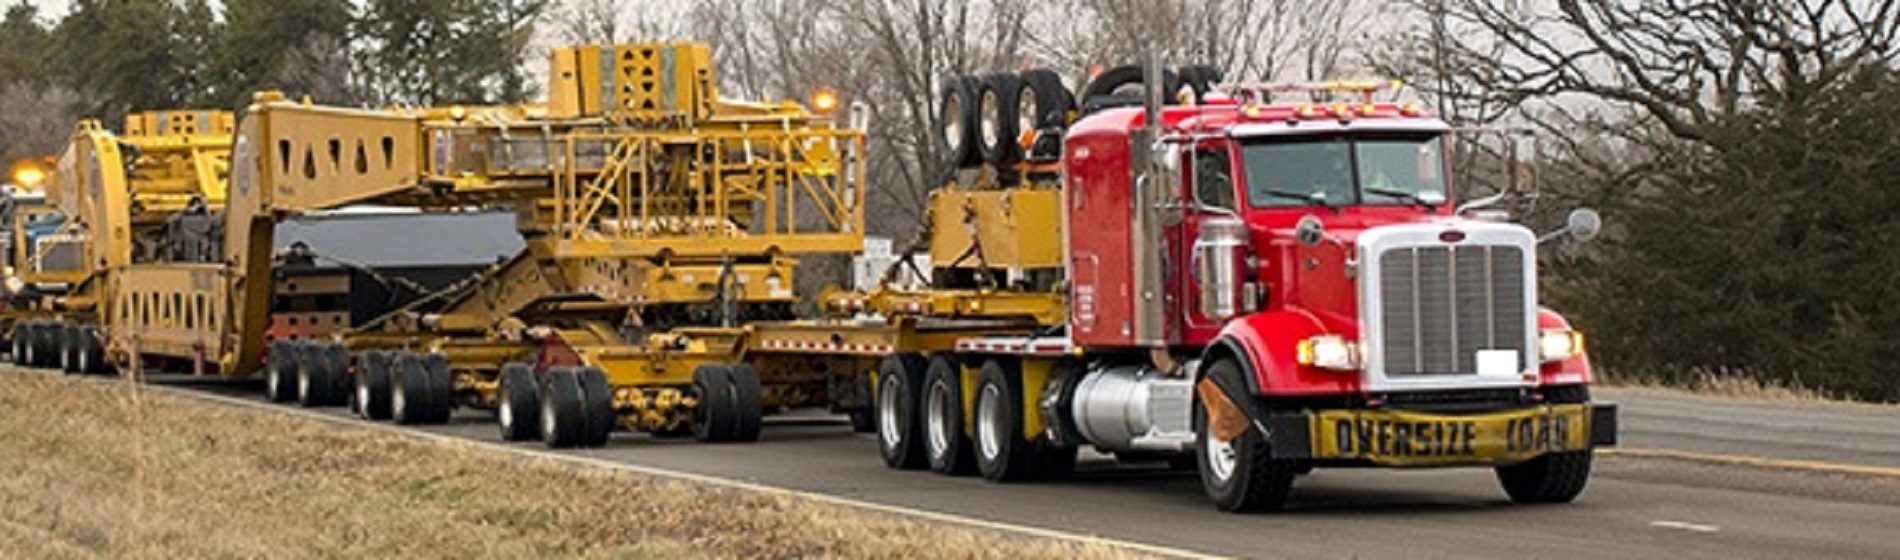 heavy equipment loaded on trailer hauled by truck